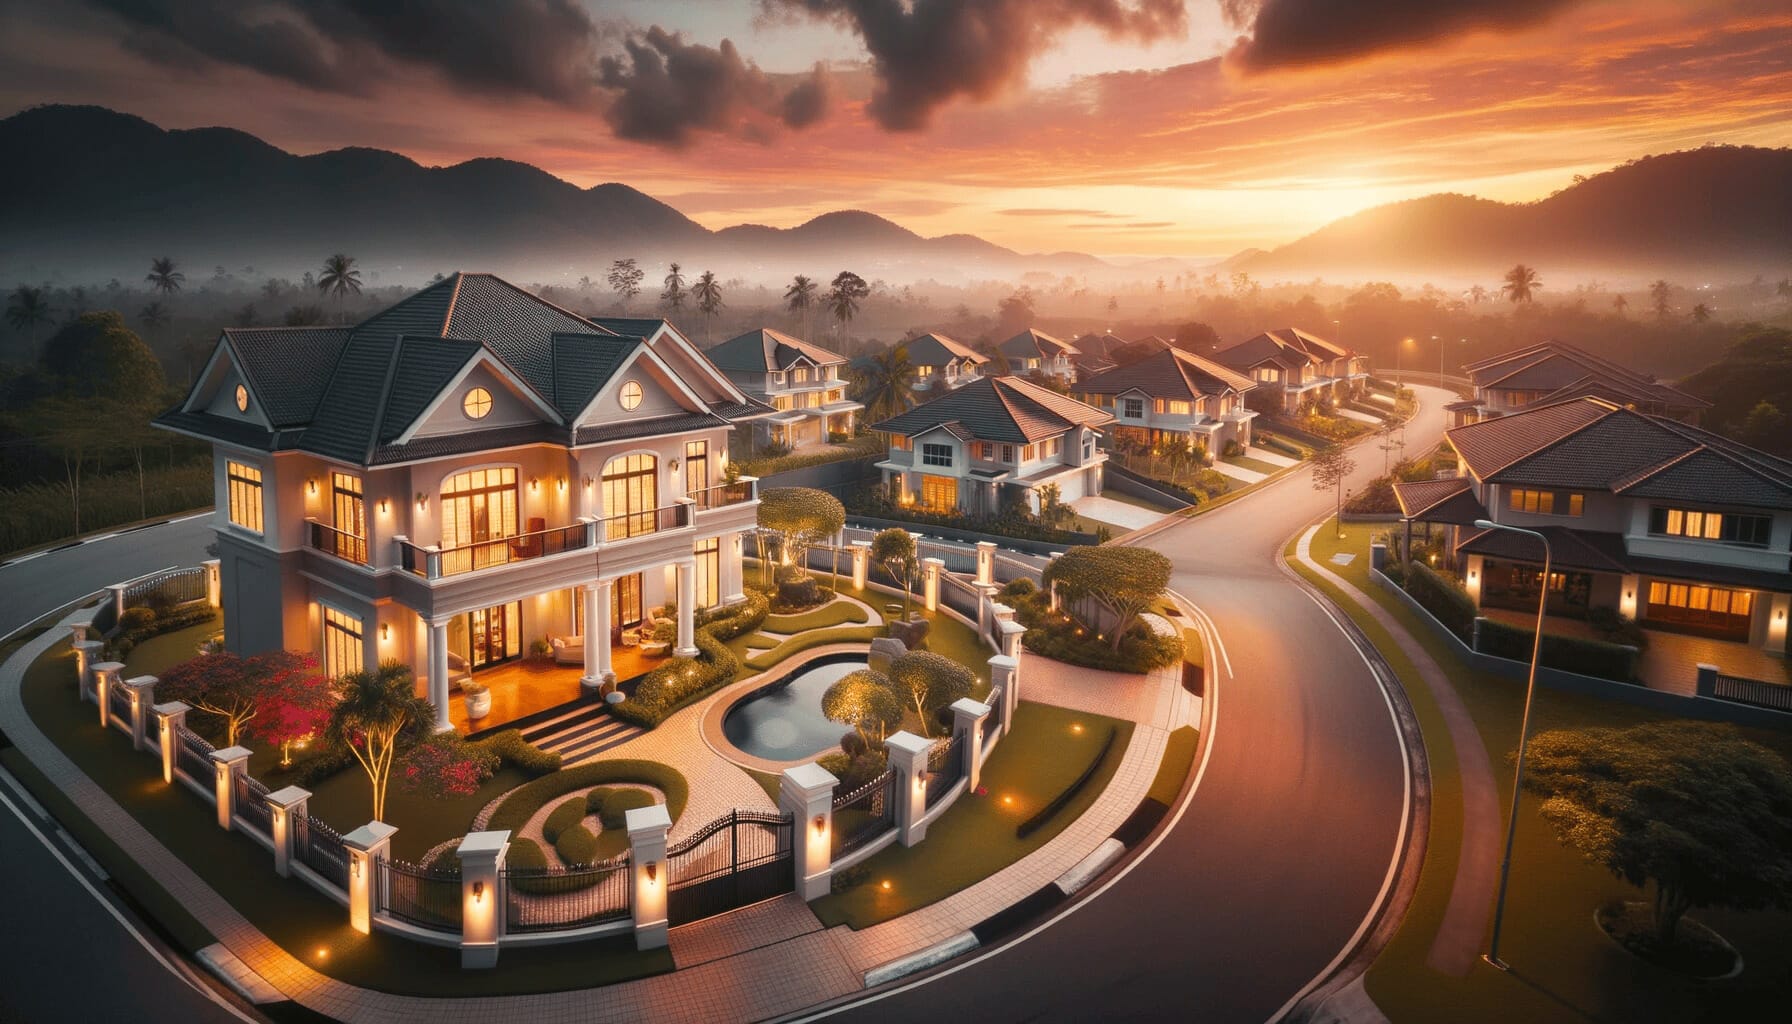 DALL·E 2023 10 16 17.15.47 Photo of a beautiful suburban house in Malaysia during sunset illustrating the dream of owning a home through a housing loan